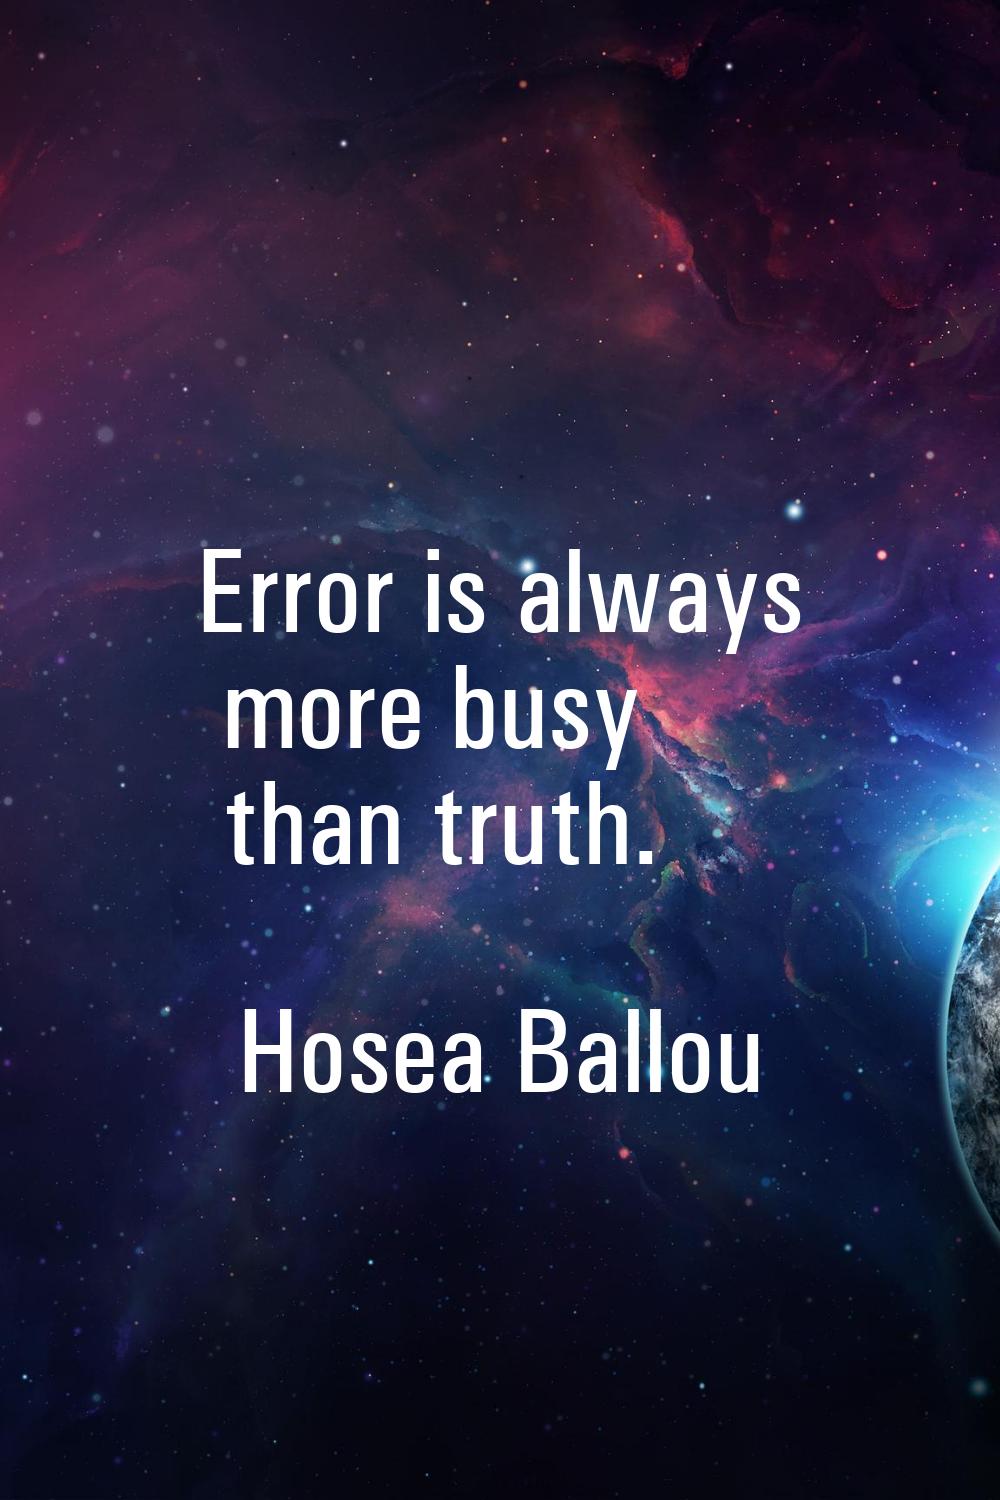 Error is always more busy than truth.